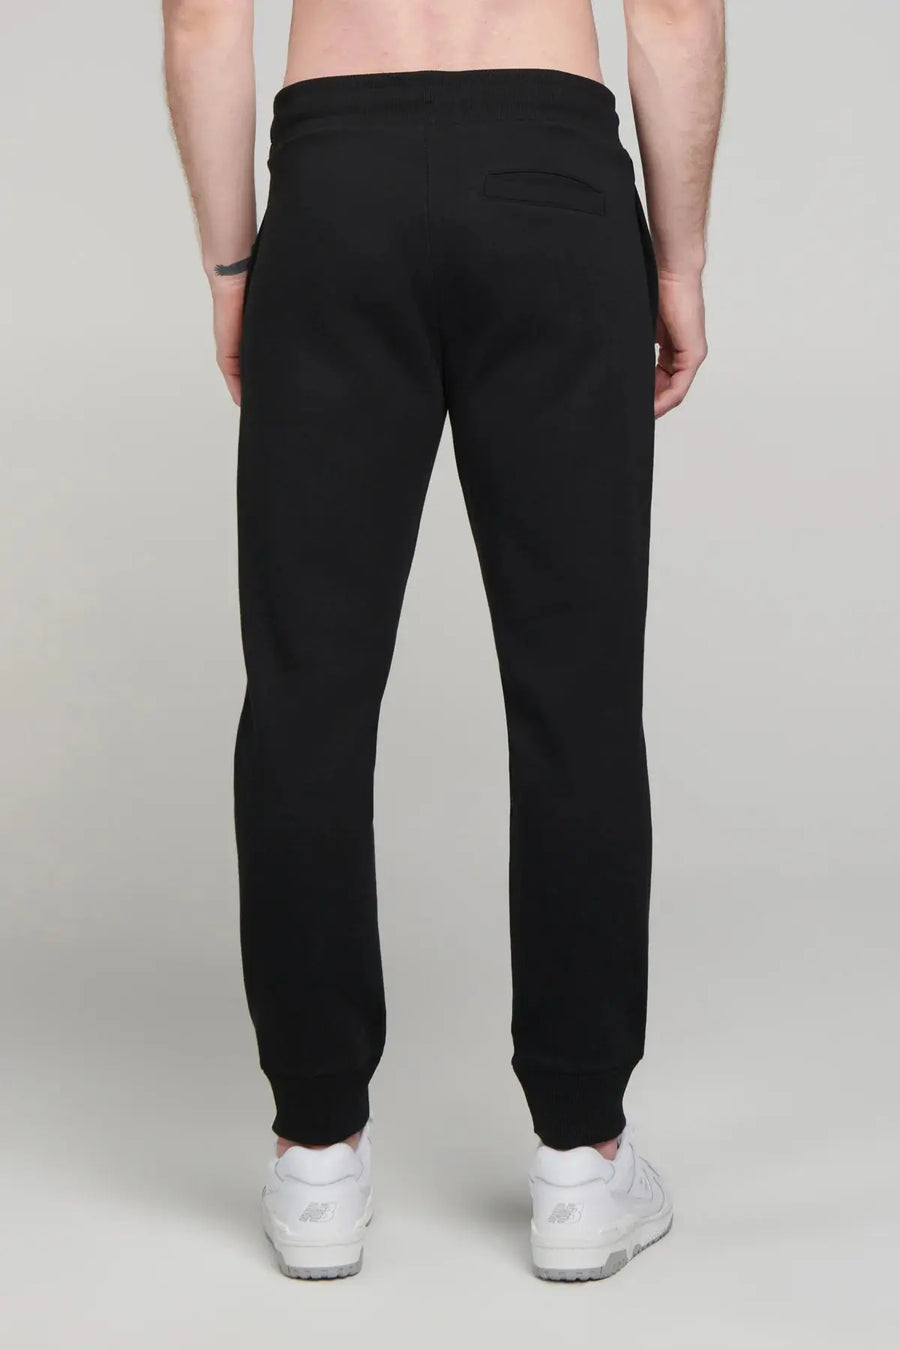 Copy of PURE & SIMPLE | Drawstring Sweatpant Charcoal Mix Pure & Simple